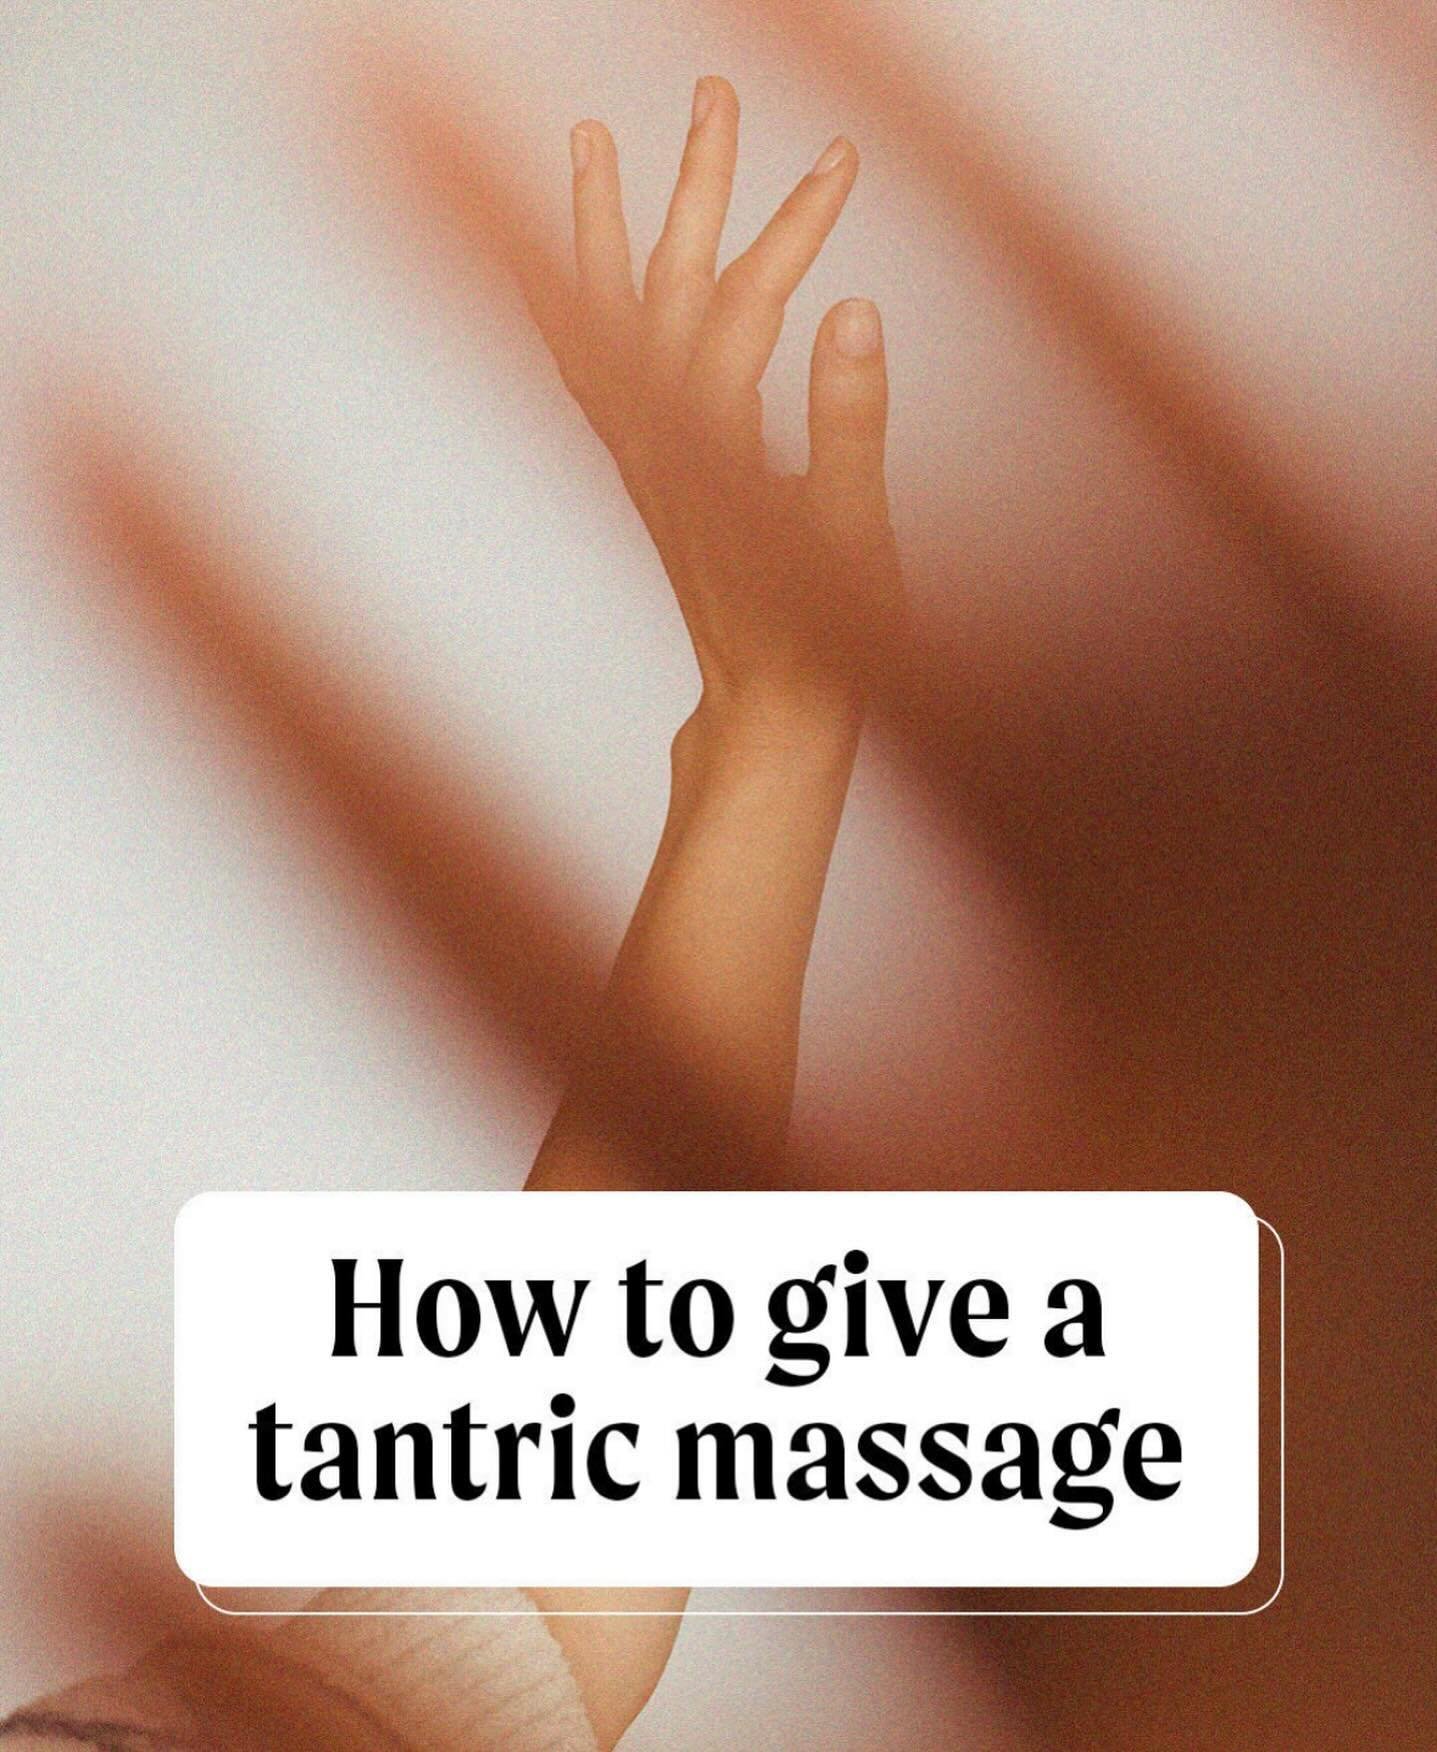 If I had a penny for every time I saw someone on Instagram use the term tantric without understanding the meaning of the word&hellip; I wrote about tantric massage and tantric s*x for Cosmo. Link in bio #tantra #journalist #tantric #massage #intimacy